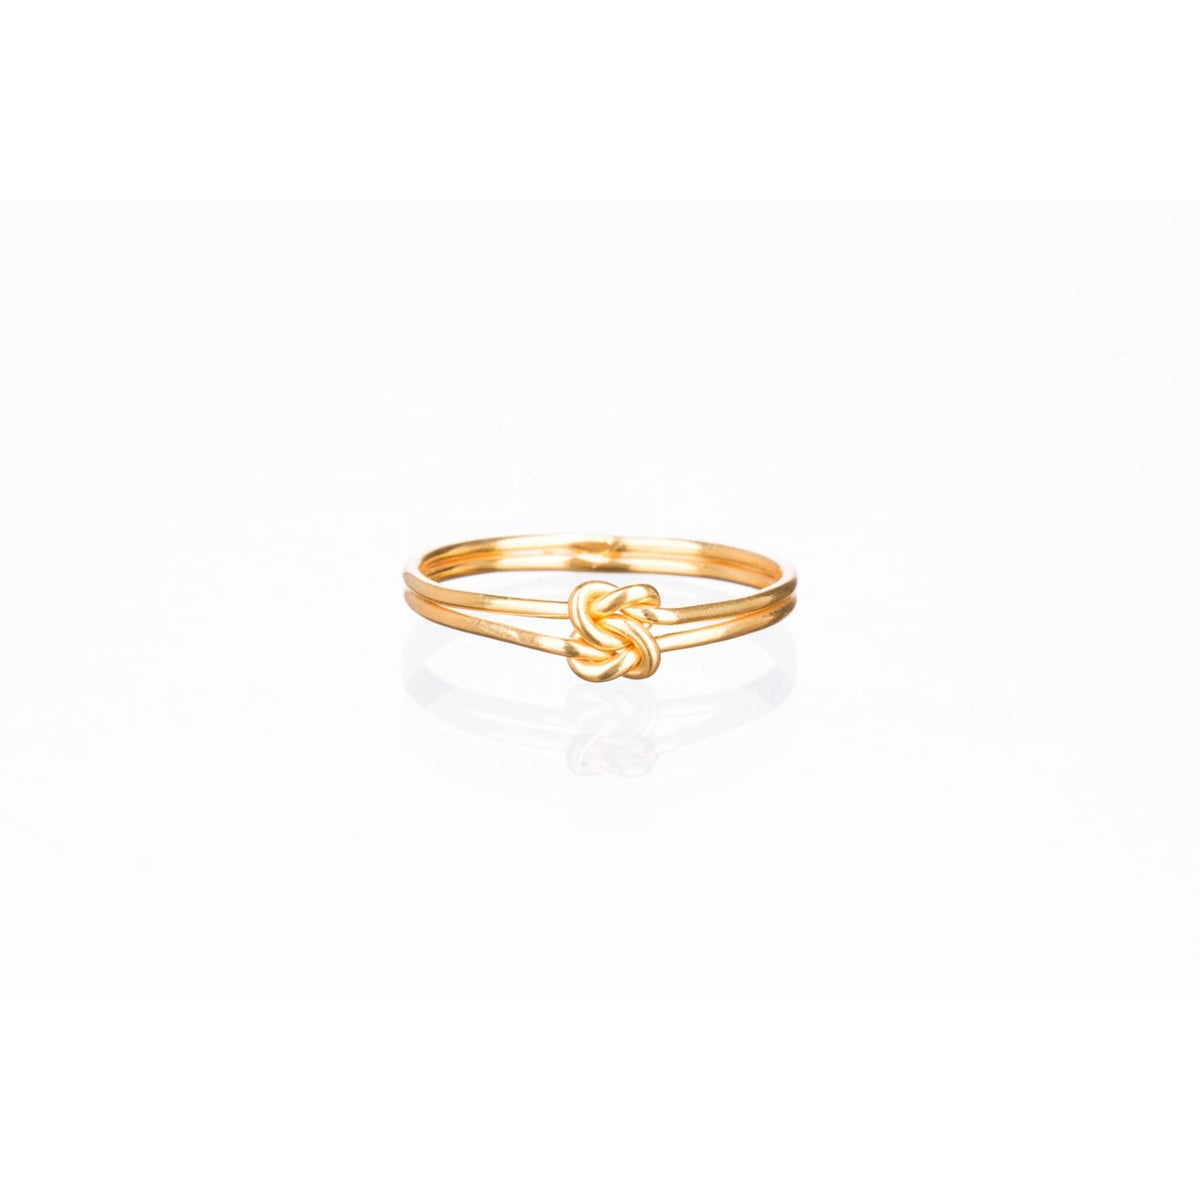 Love Knot Ring • 14k Gold Filled Infinity Celtic • Perfect